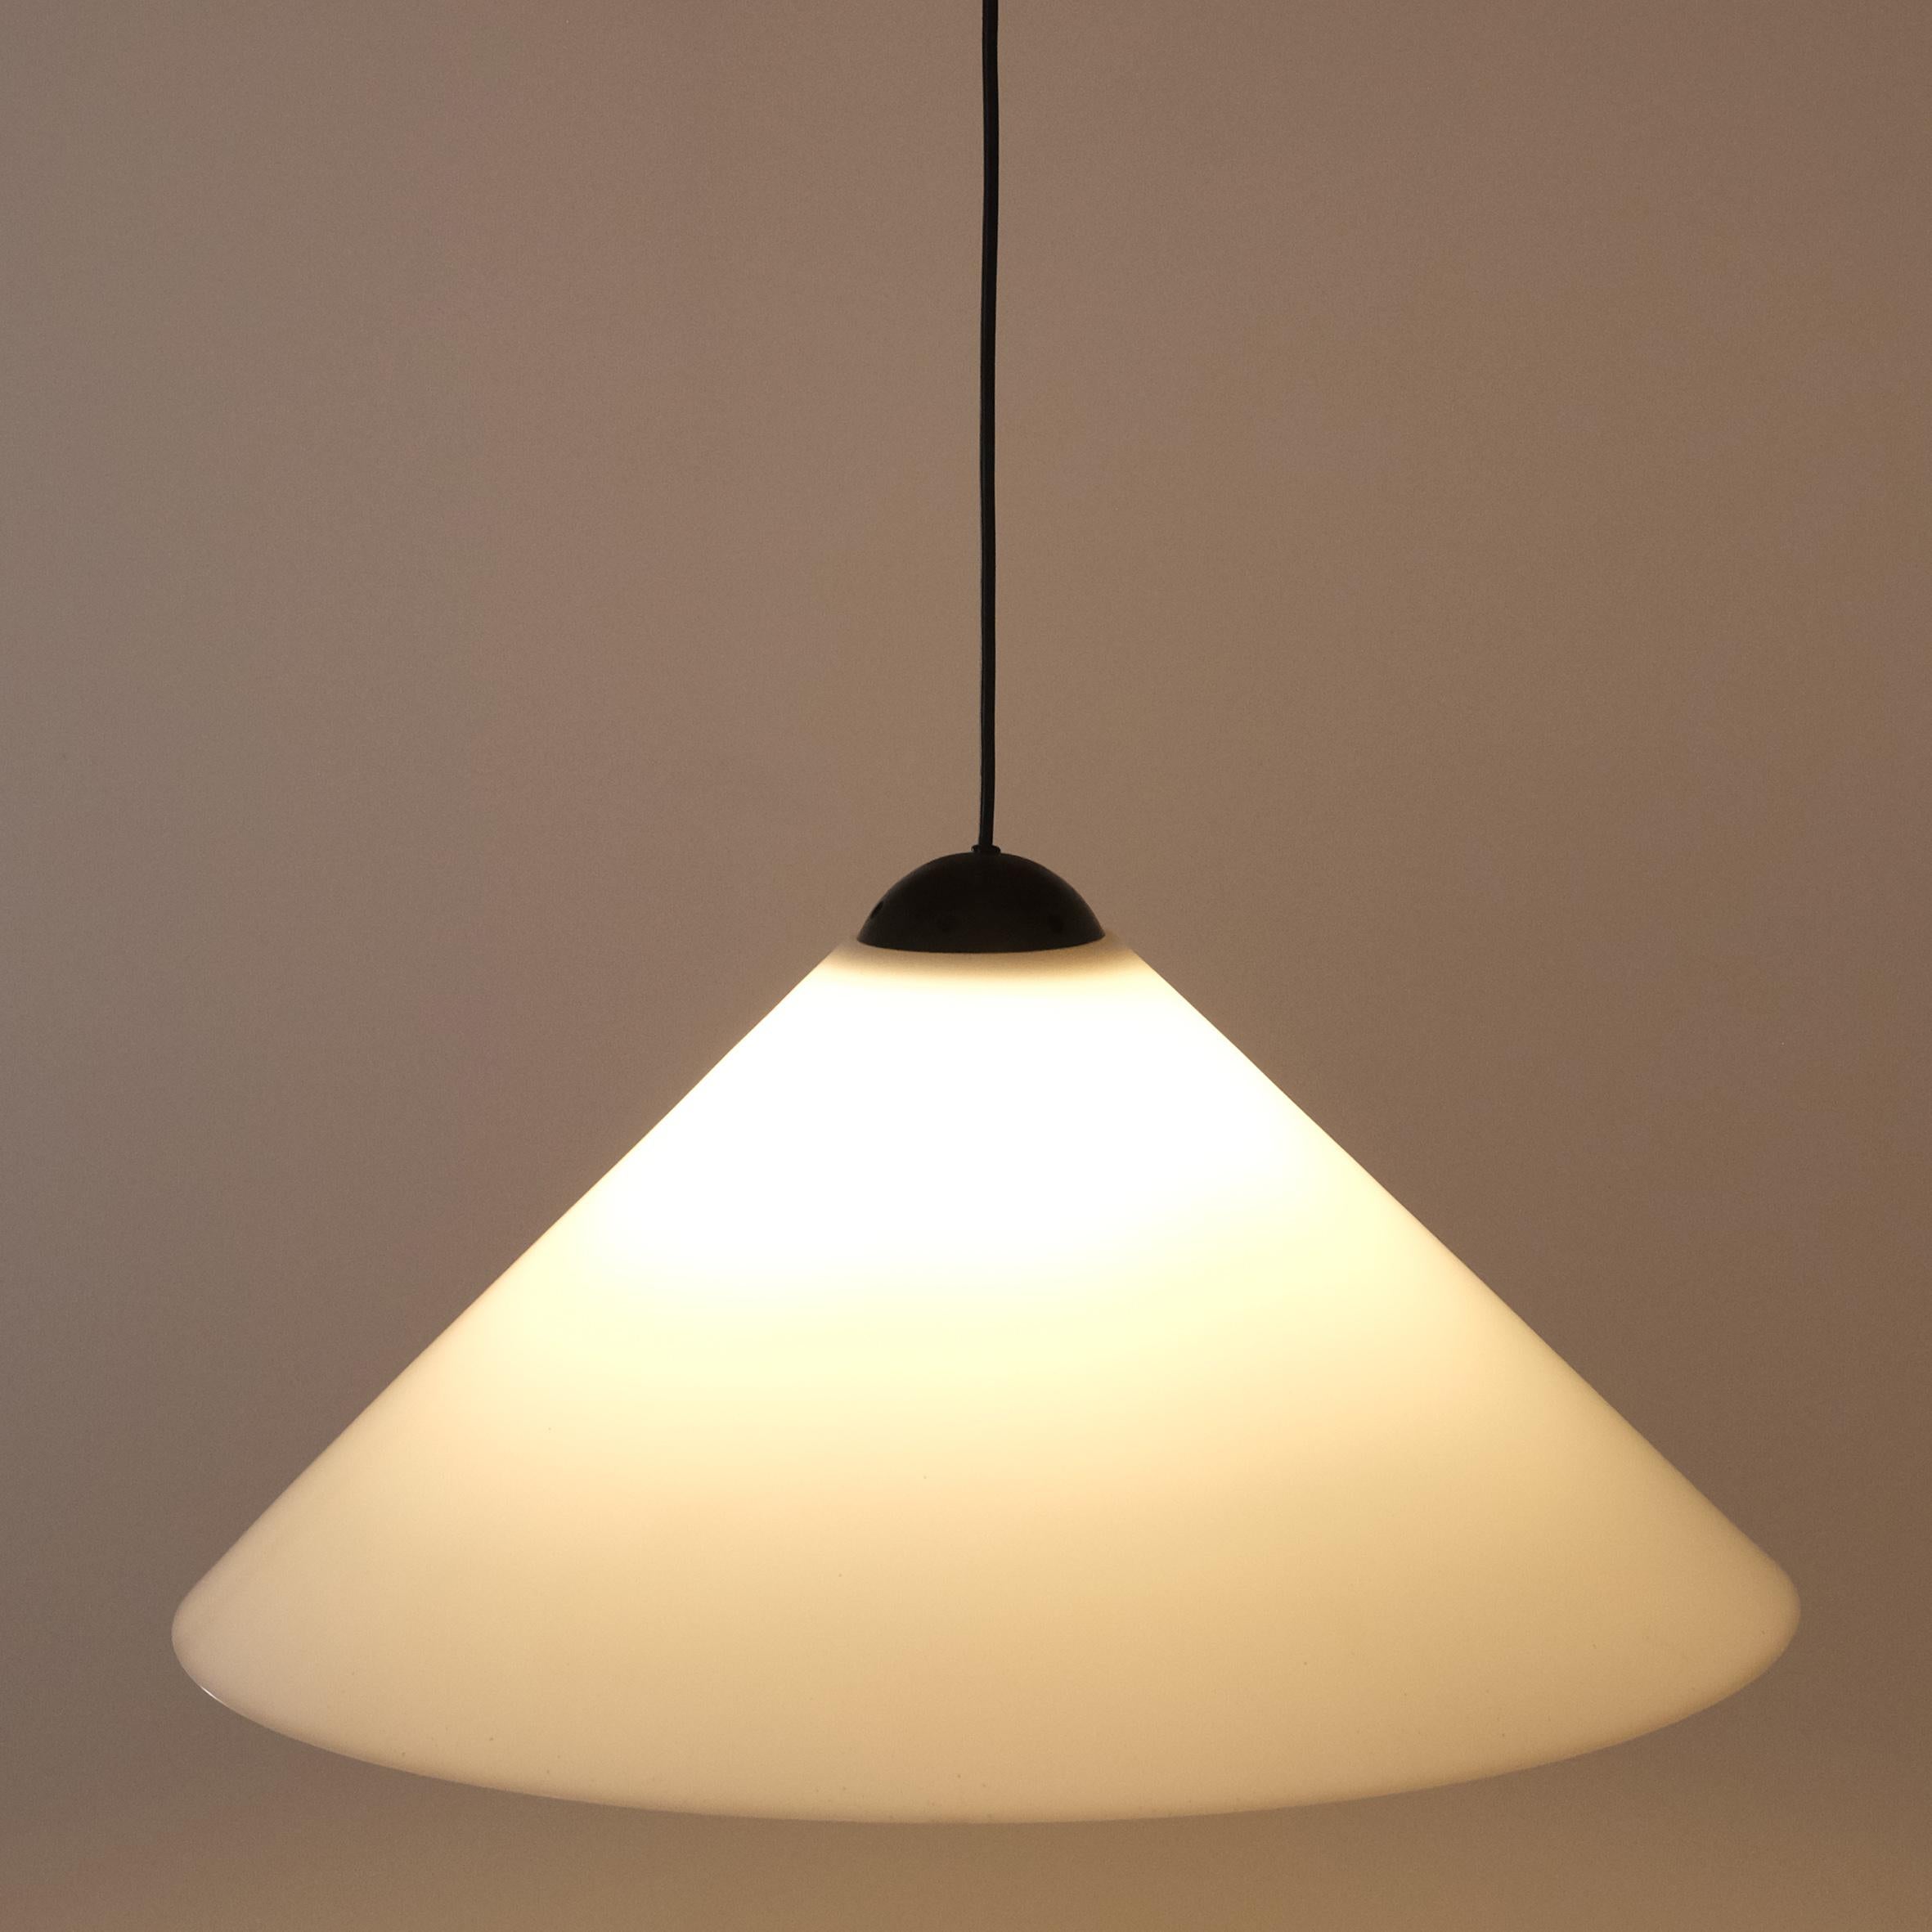 Vico Magistretti (1920-2006)

Snow 401

A metal and methacrylate pendant light, the white methacrylate conical shade supported with a black lacquered metal sphere issuing a light bulb hanging on a black cable.
Produced par O’luce, Italy.
Circa